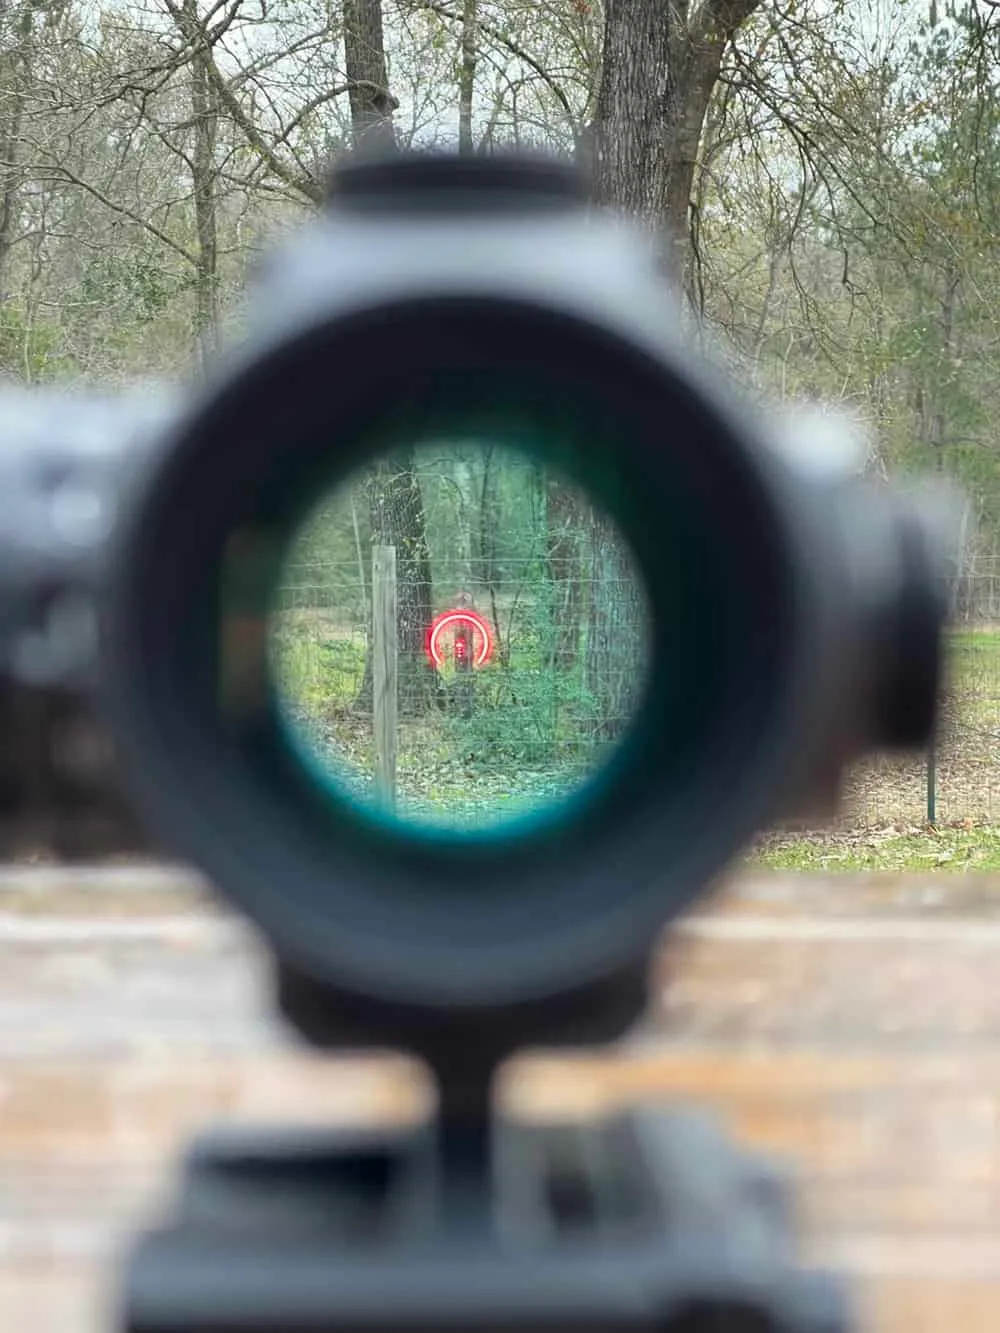 Primary Arms SLx Microdot 25 Gen 2 reticle test